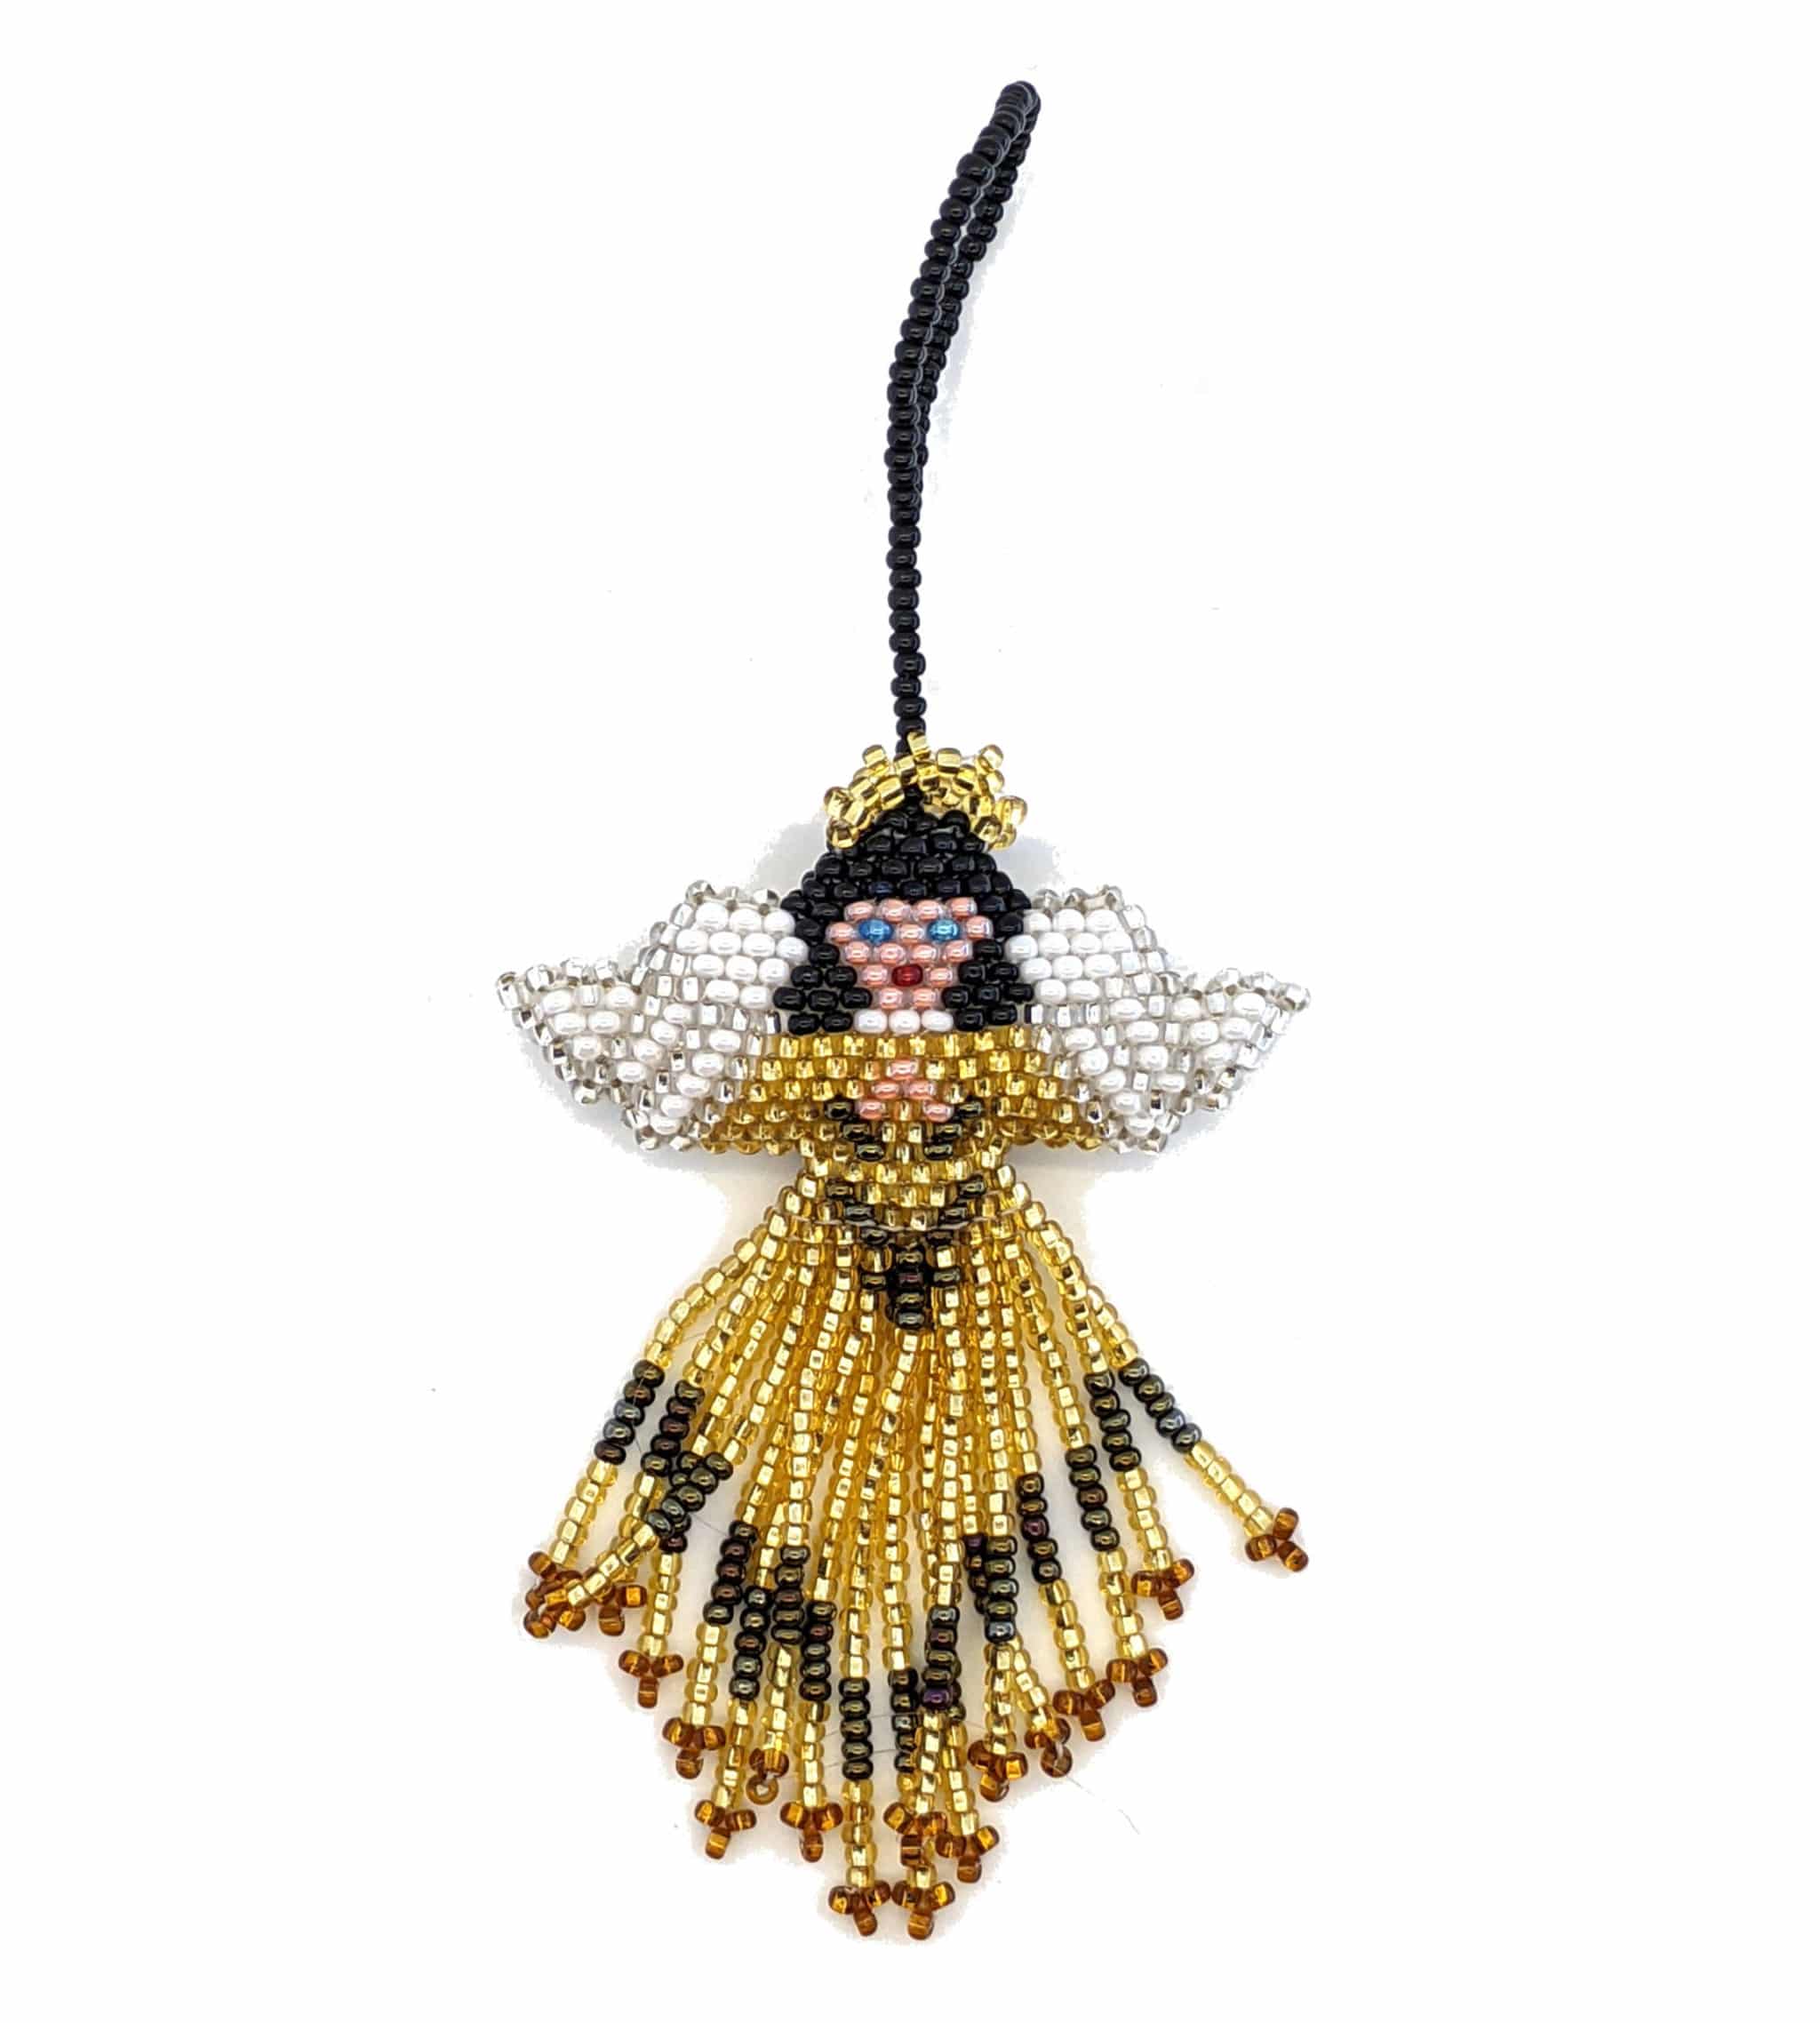 Angel Beaded Ornament - White Face - Black Hair - with Variety of Skirt Colors